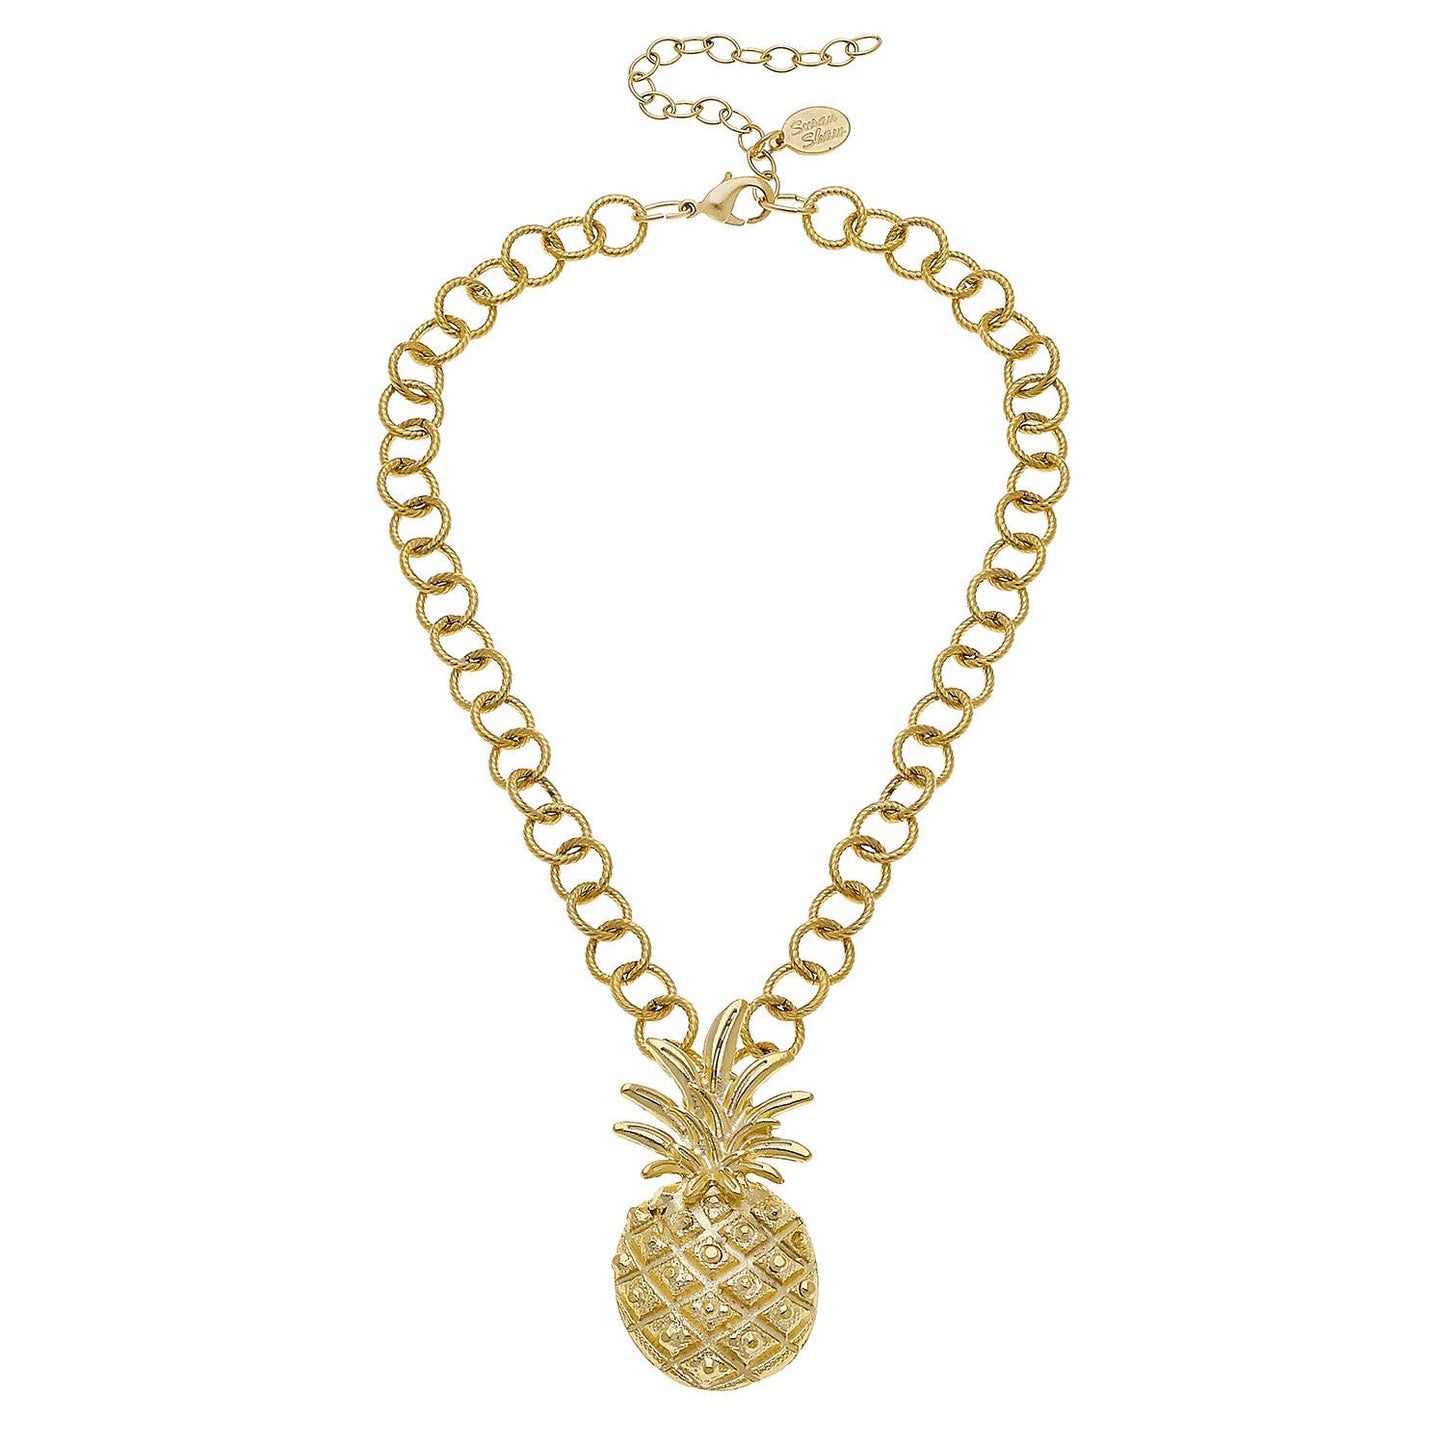 Gold Pineapple Necklace